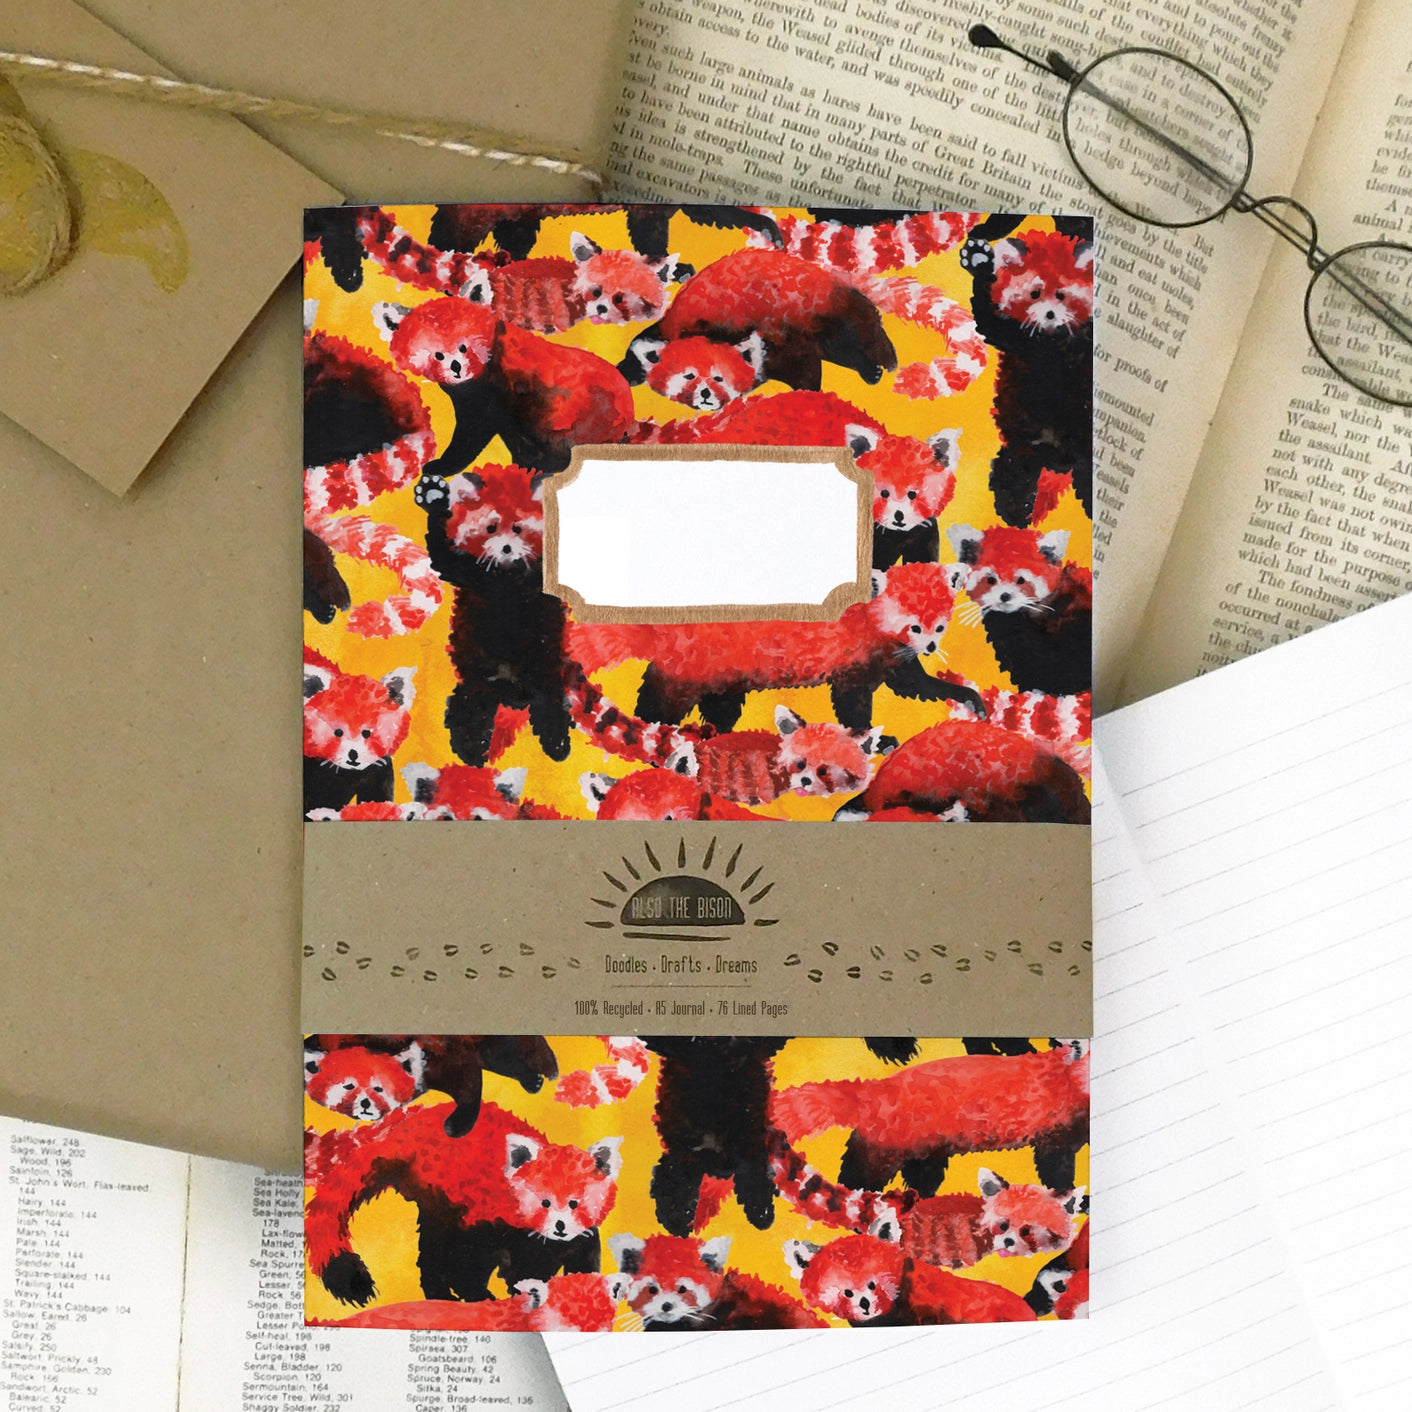 Pack of Red Pandas Print A5 Journal - Lined